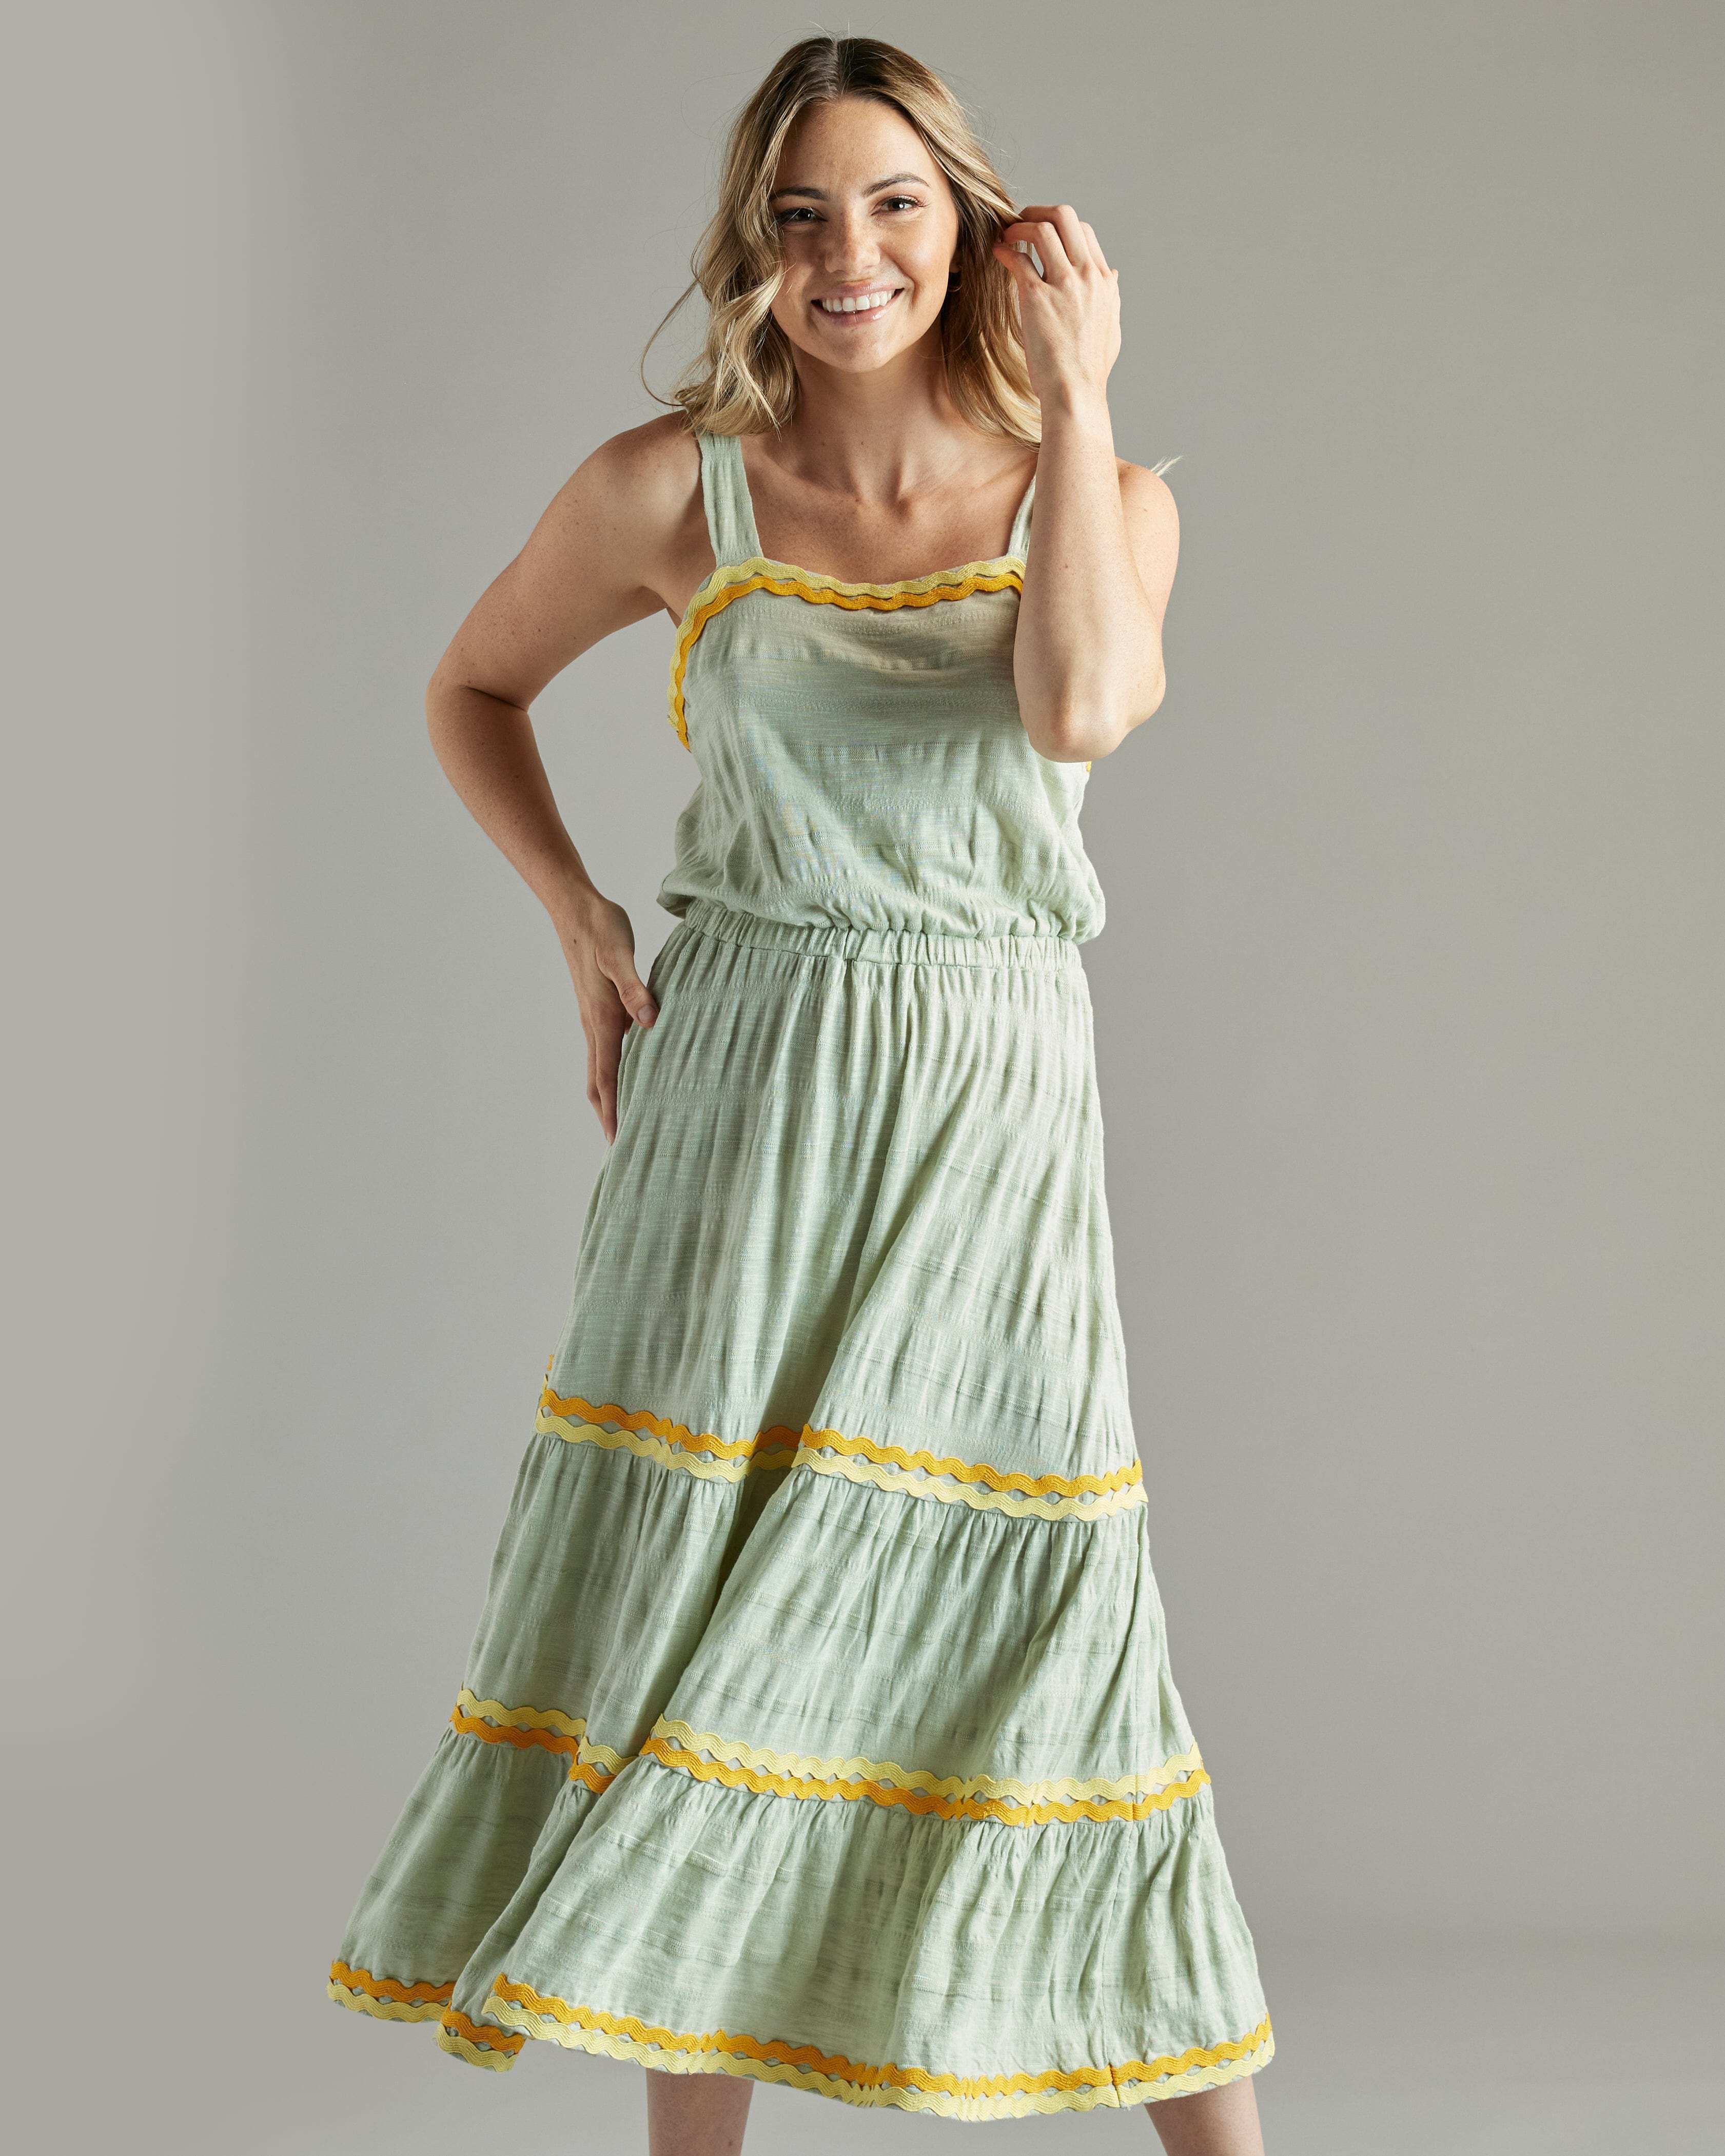 Woman in a sleeveless, midi-length green dress with orange and yellow lace accents